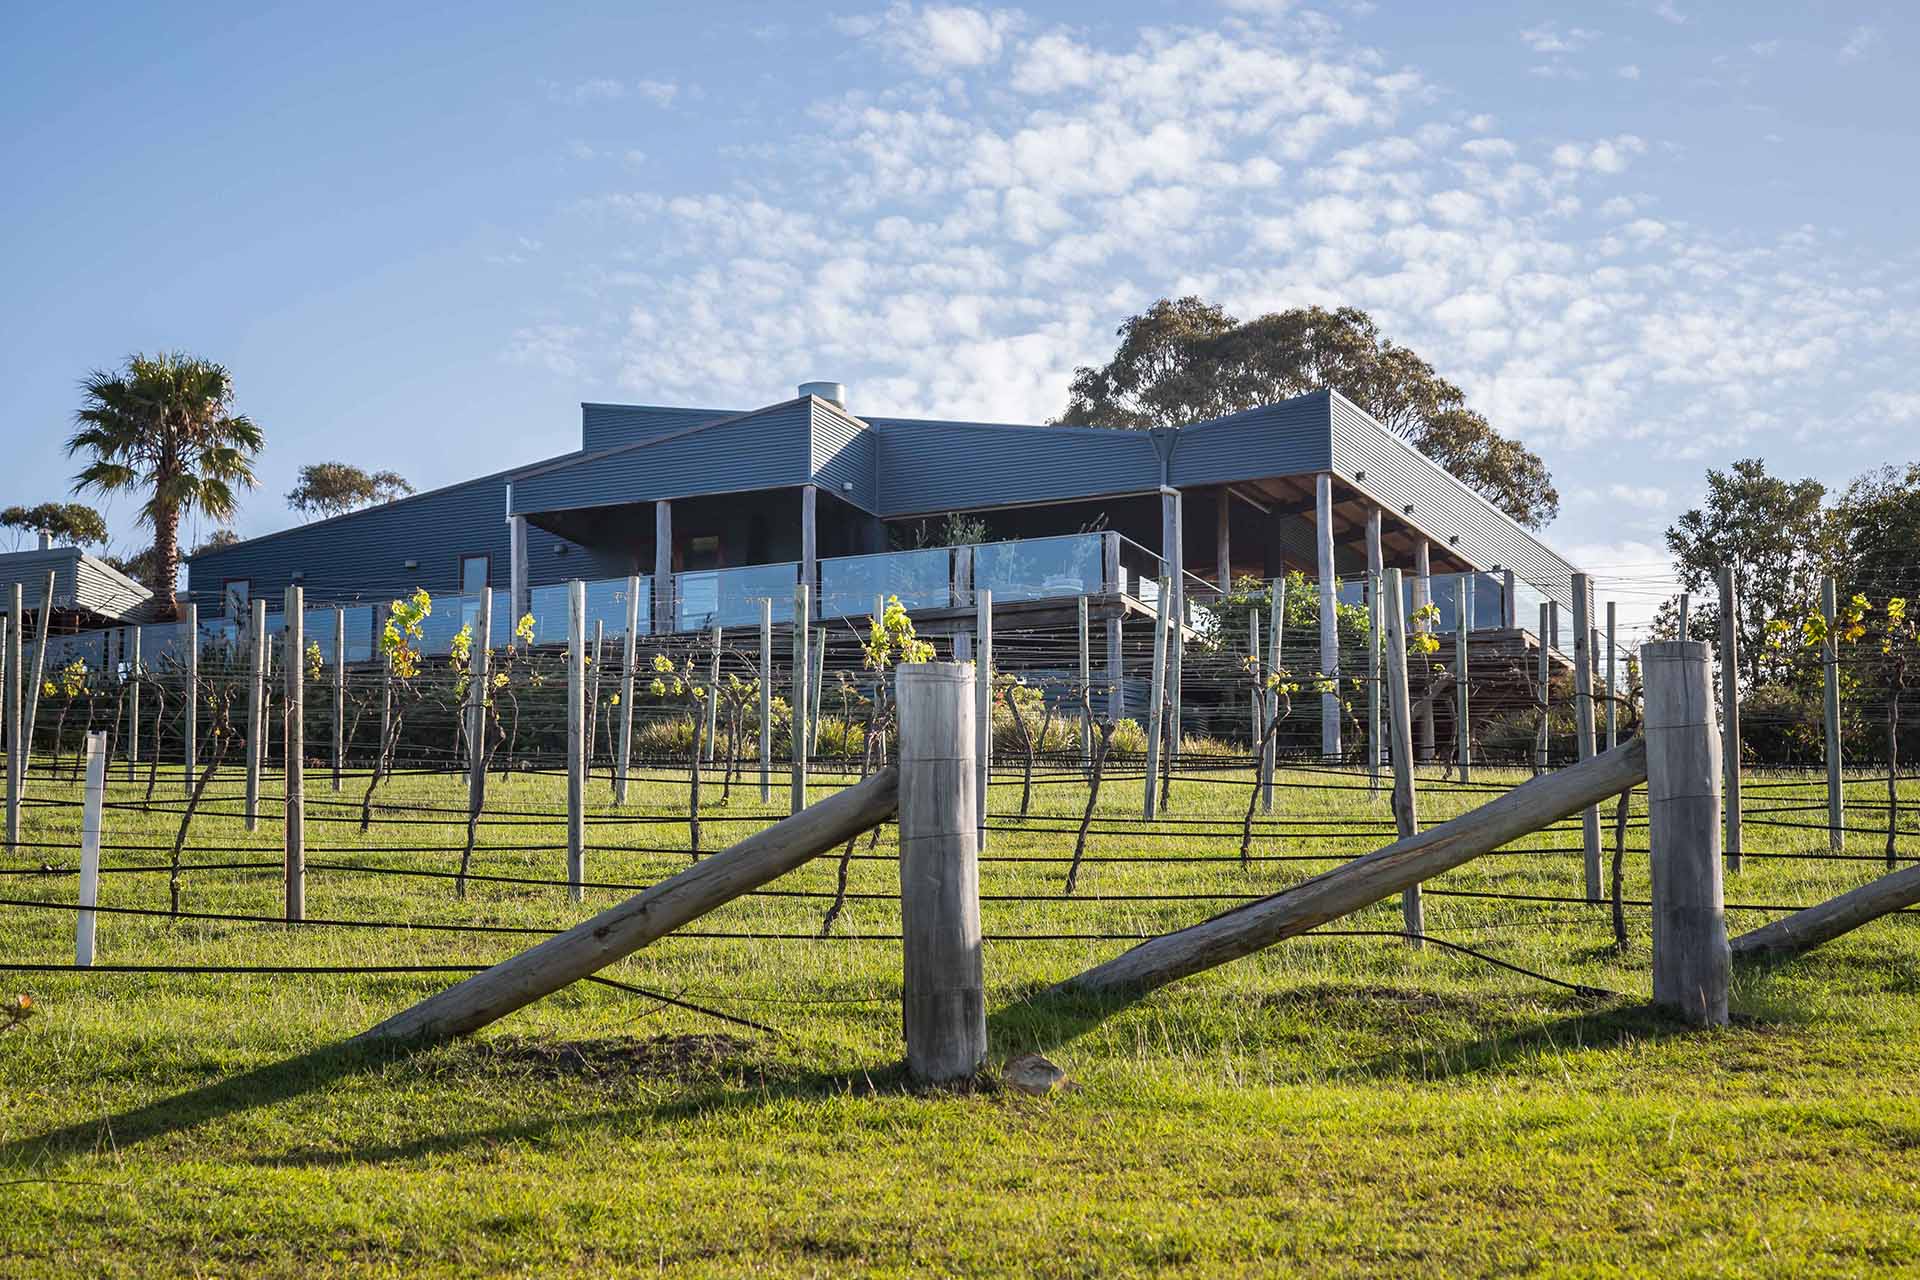 Blog|contentious Character|wineries Near Canberra & Nsw